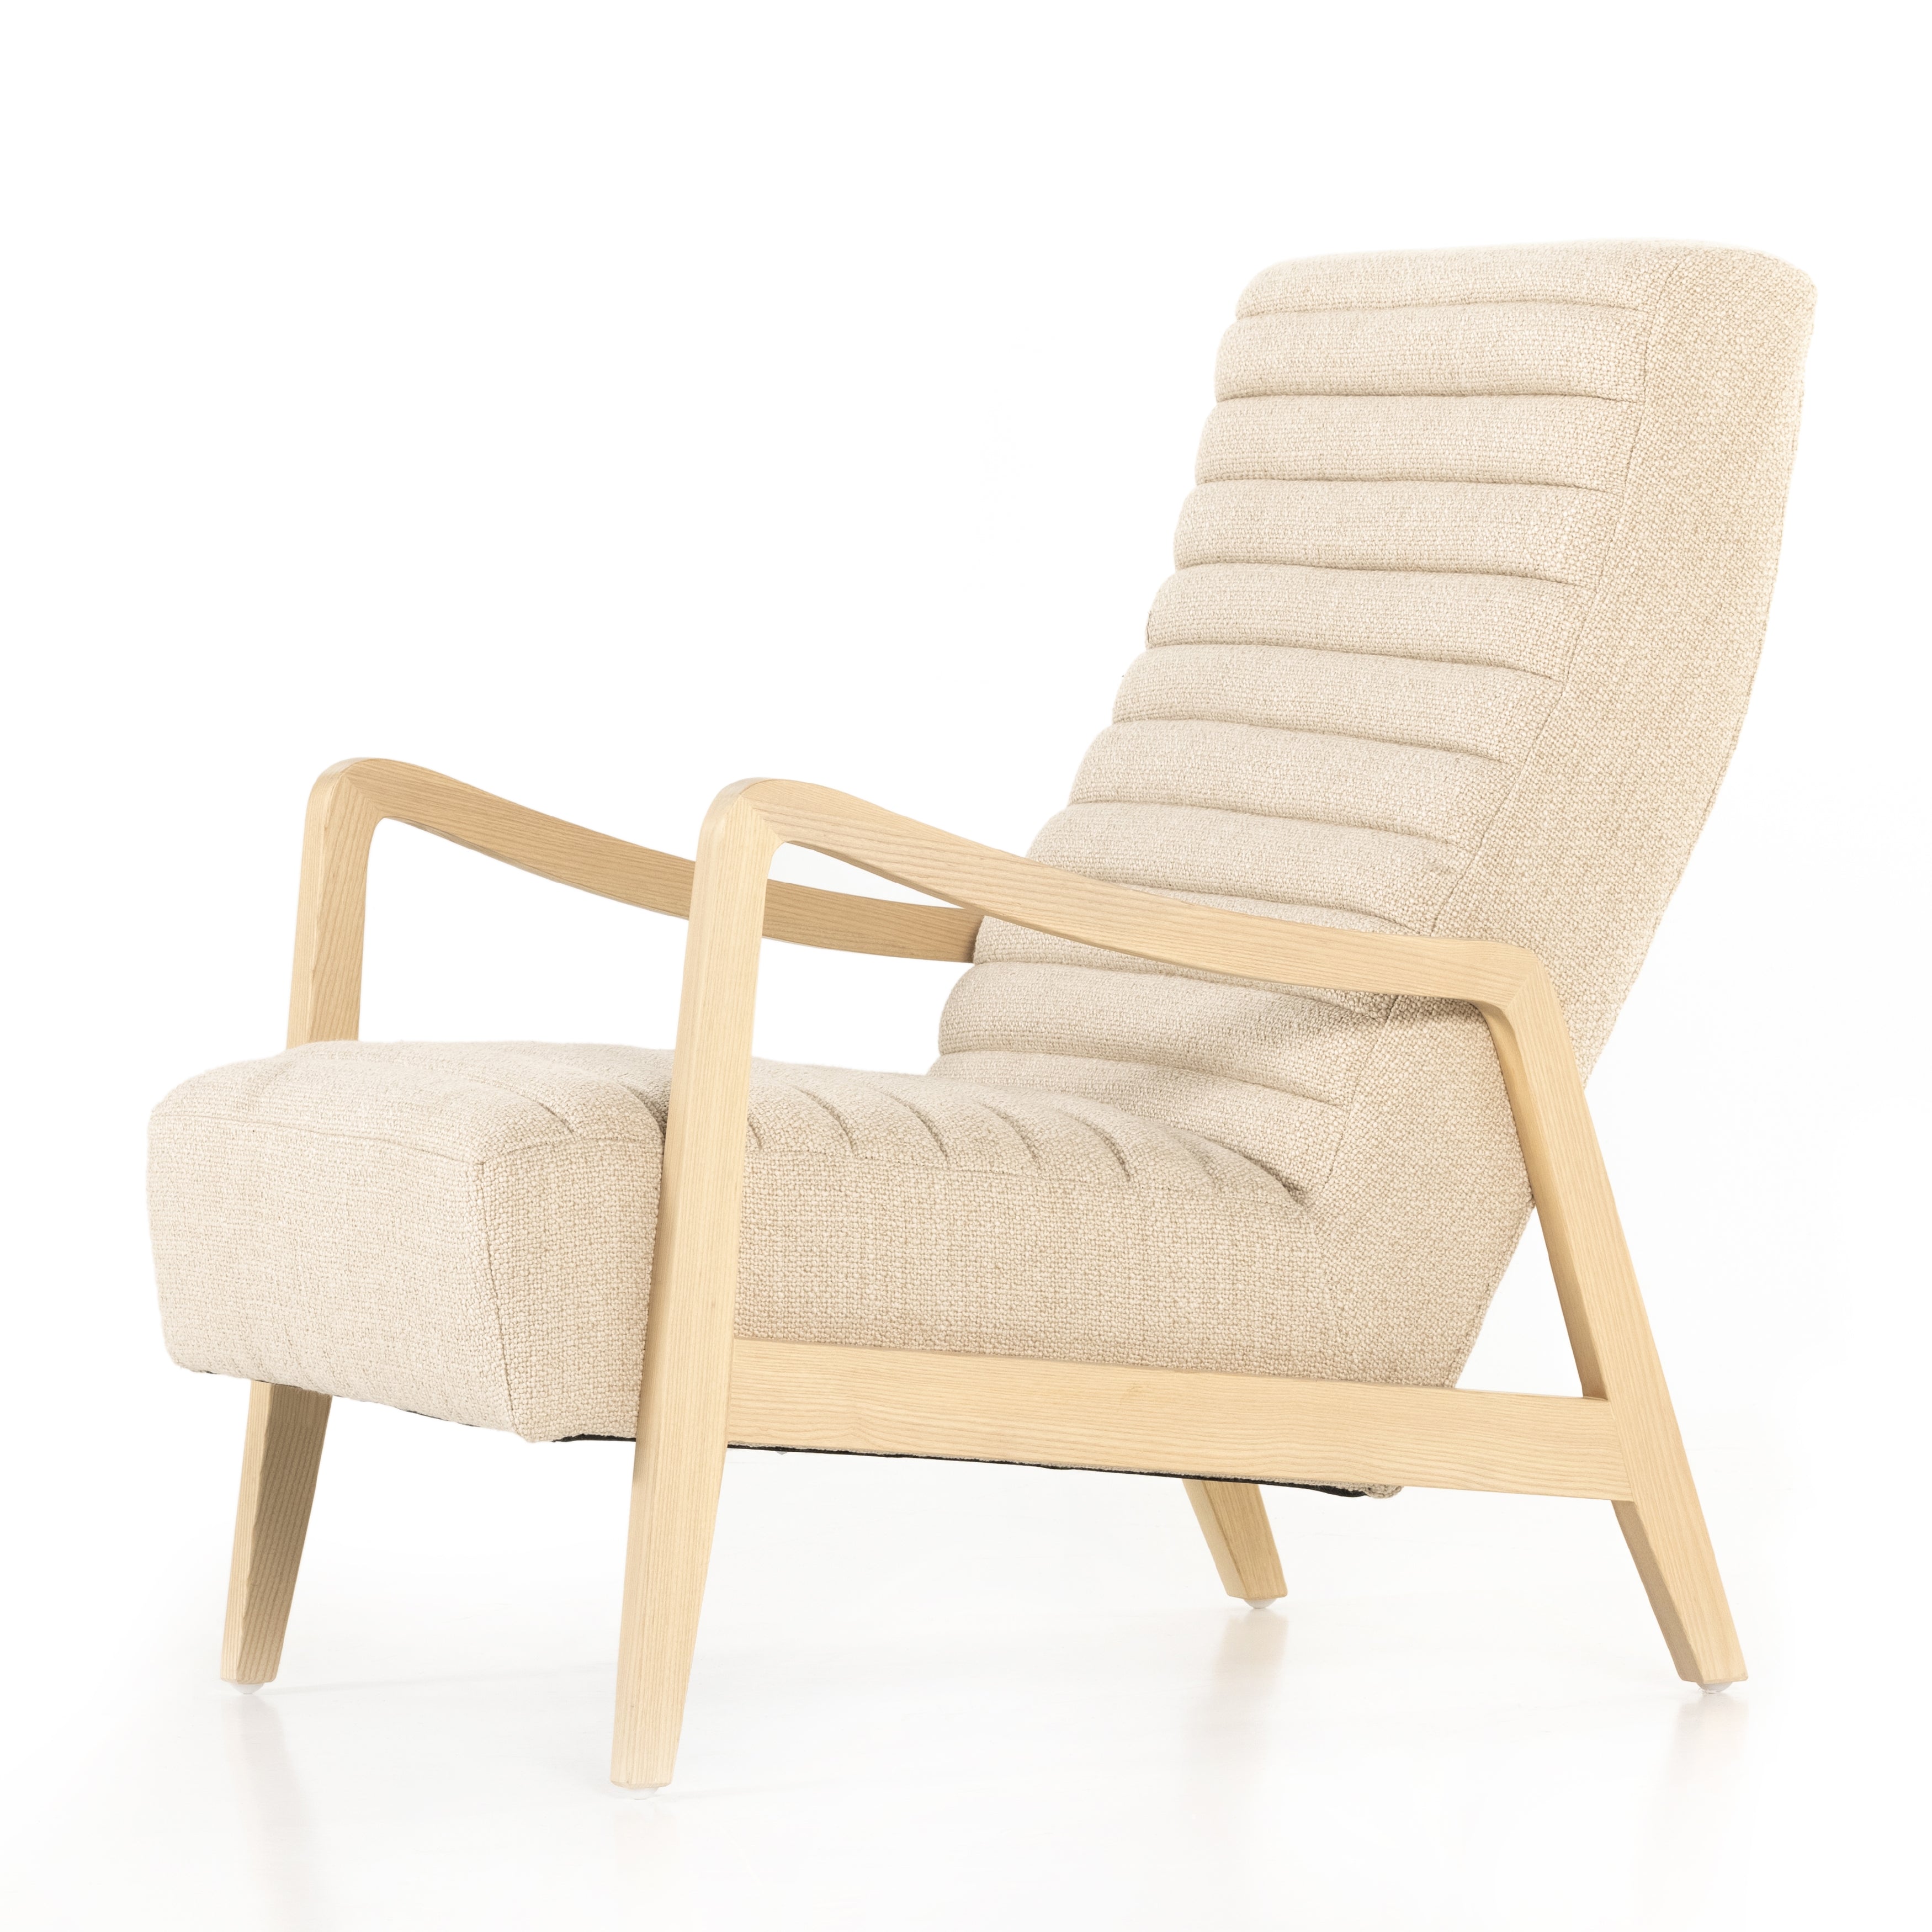 Irving Flax Fabric with Natural Whitewash Ash | Chance Chair | Valley Ridge Furniture